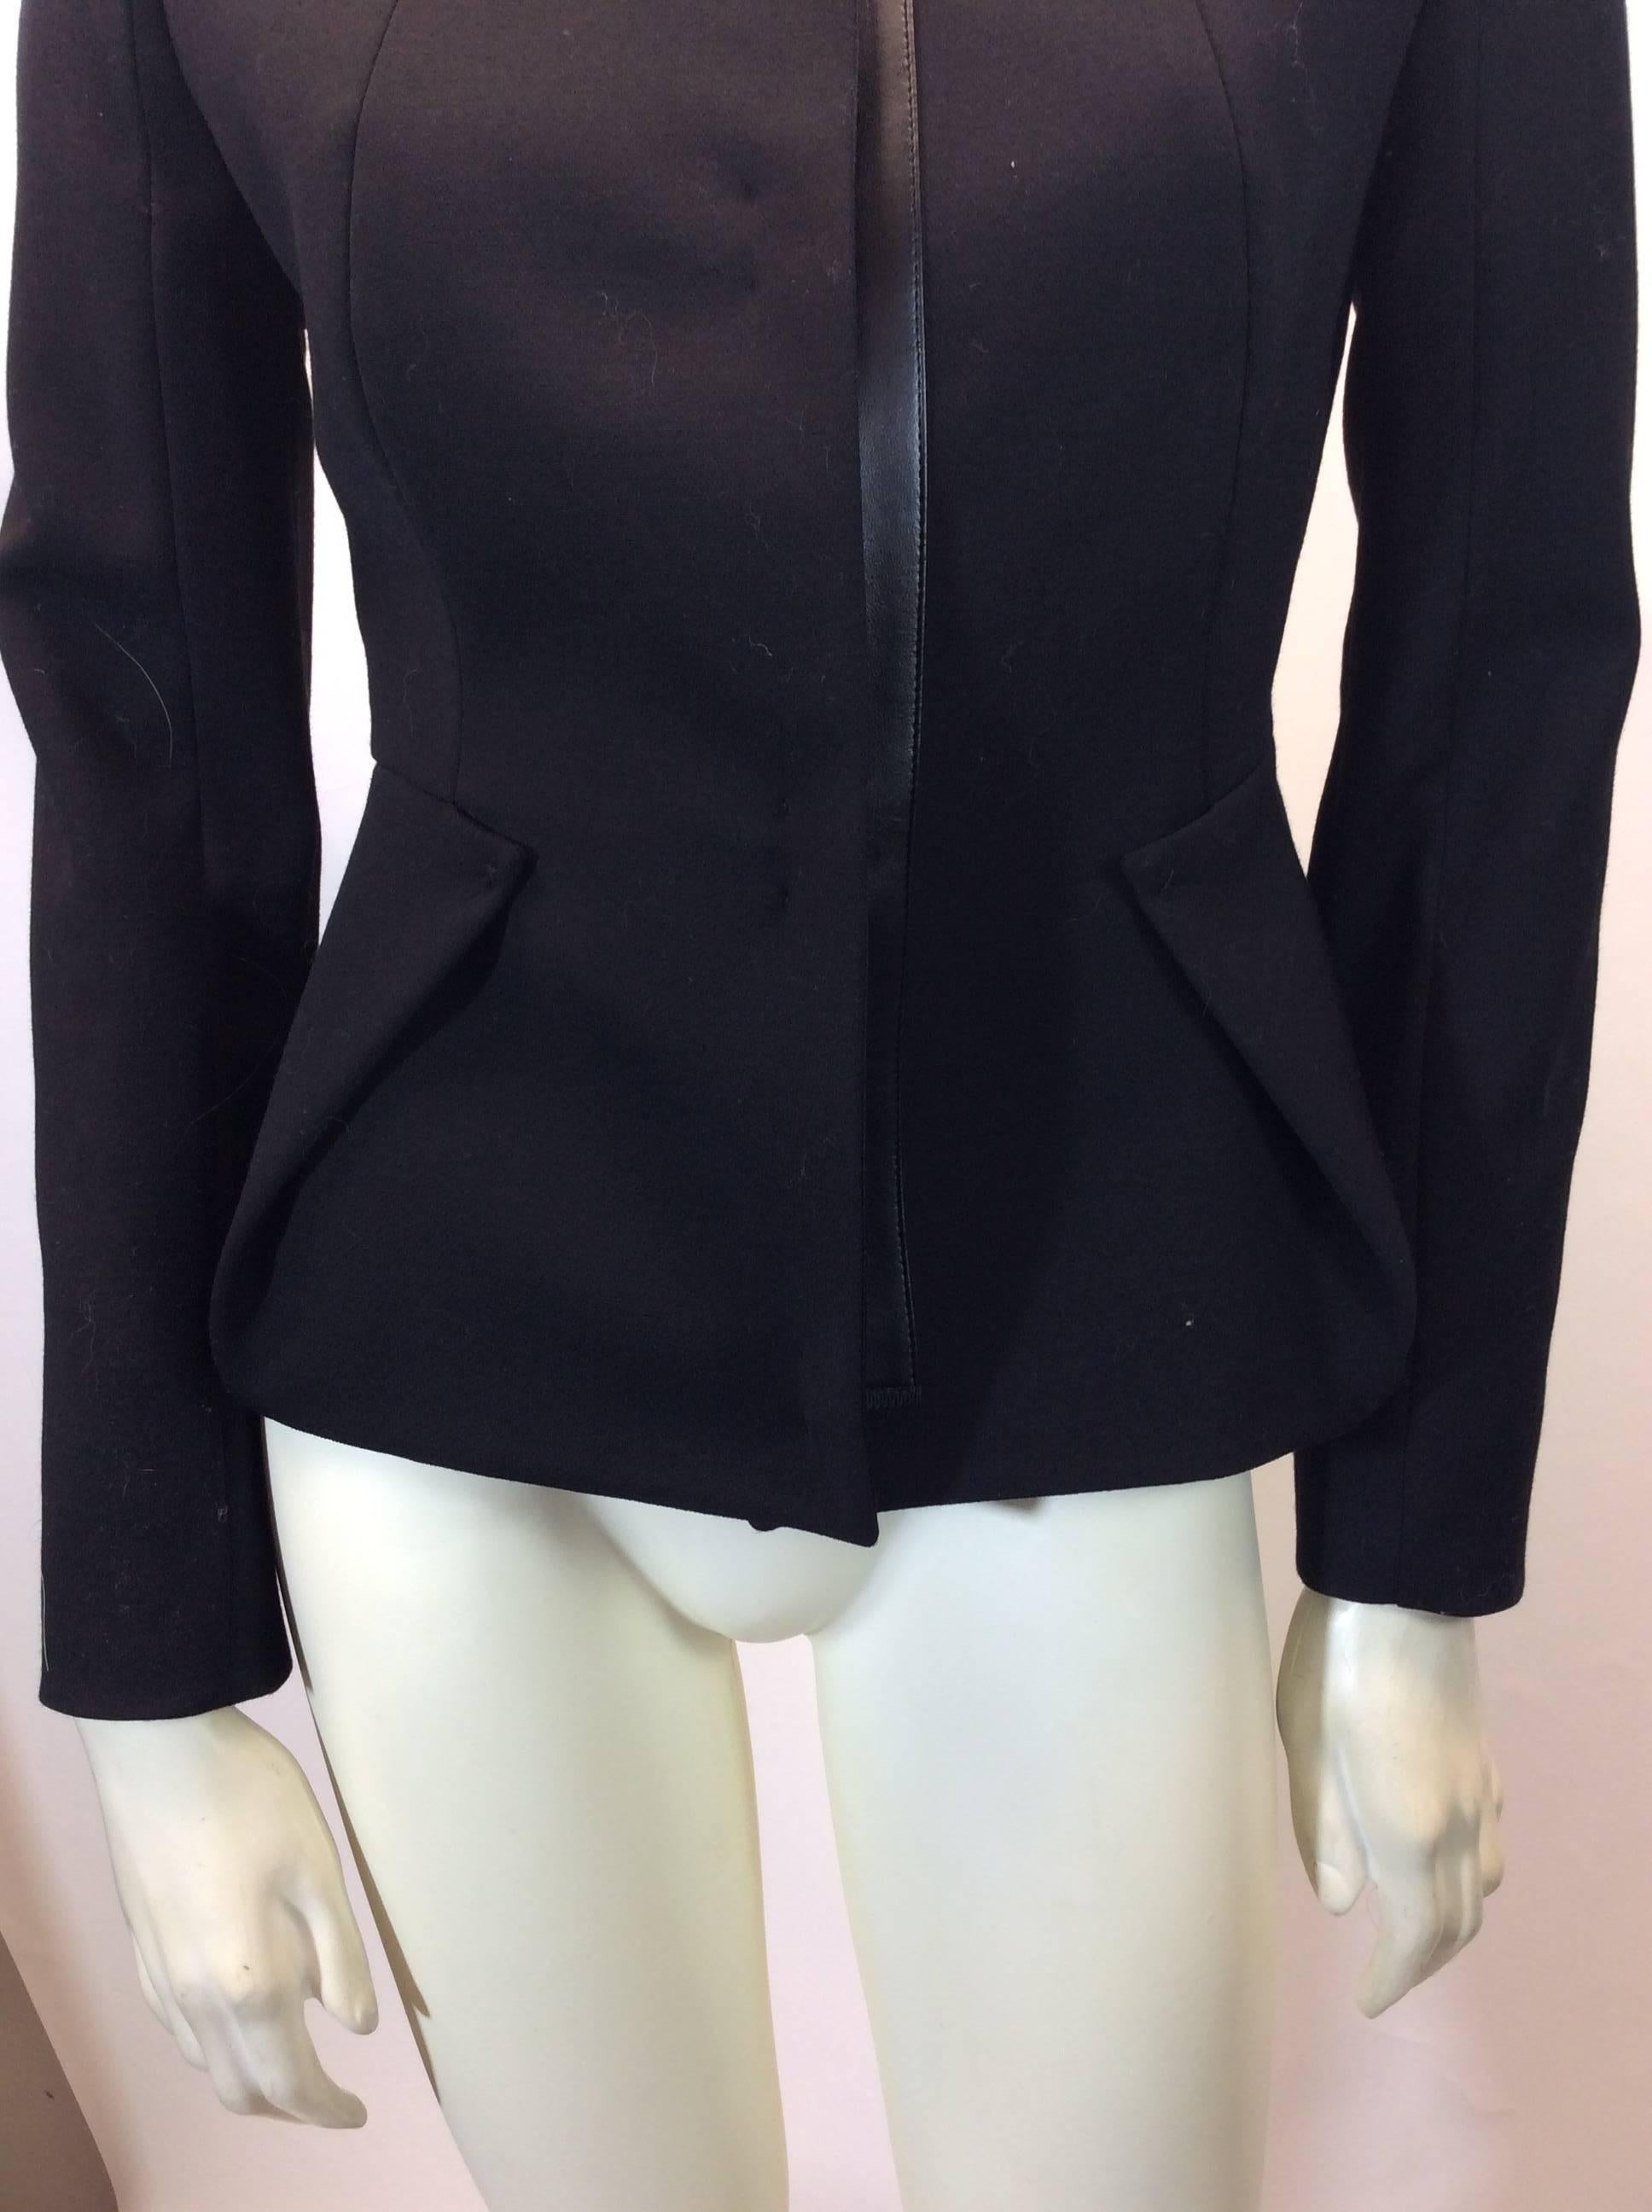 Pucci Black Leather Trim Blazer
Size 36
Center clasp closures with leather trim
Made in Italy
Fully lined interior
$250
